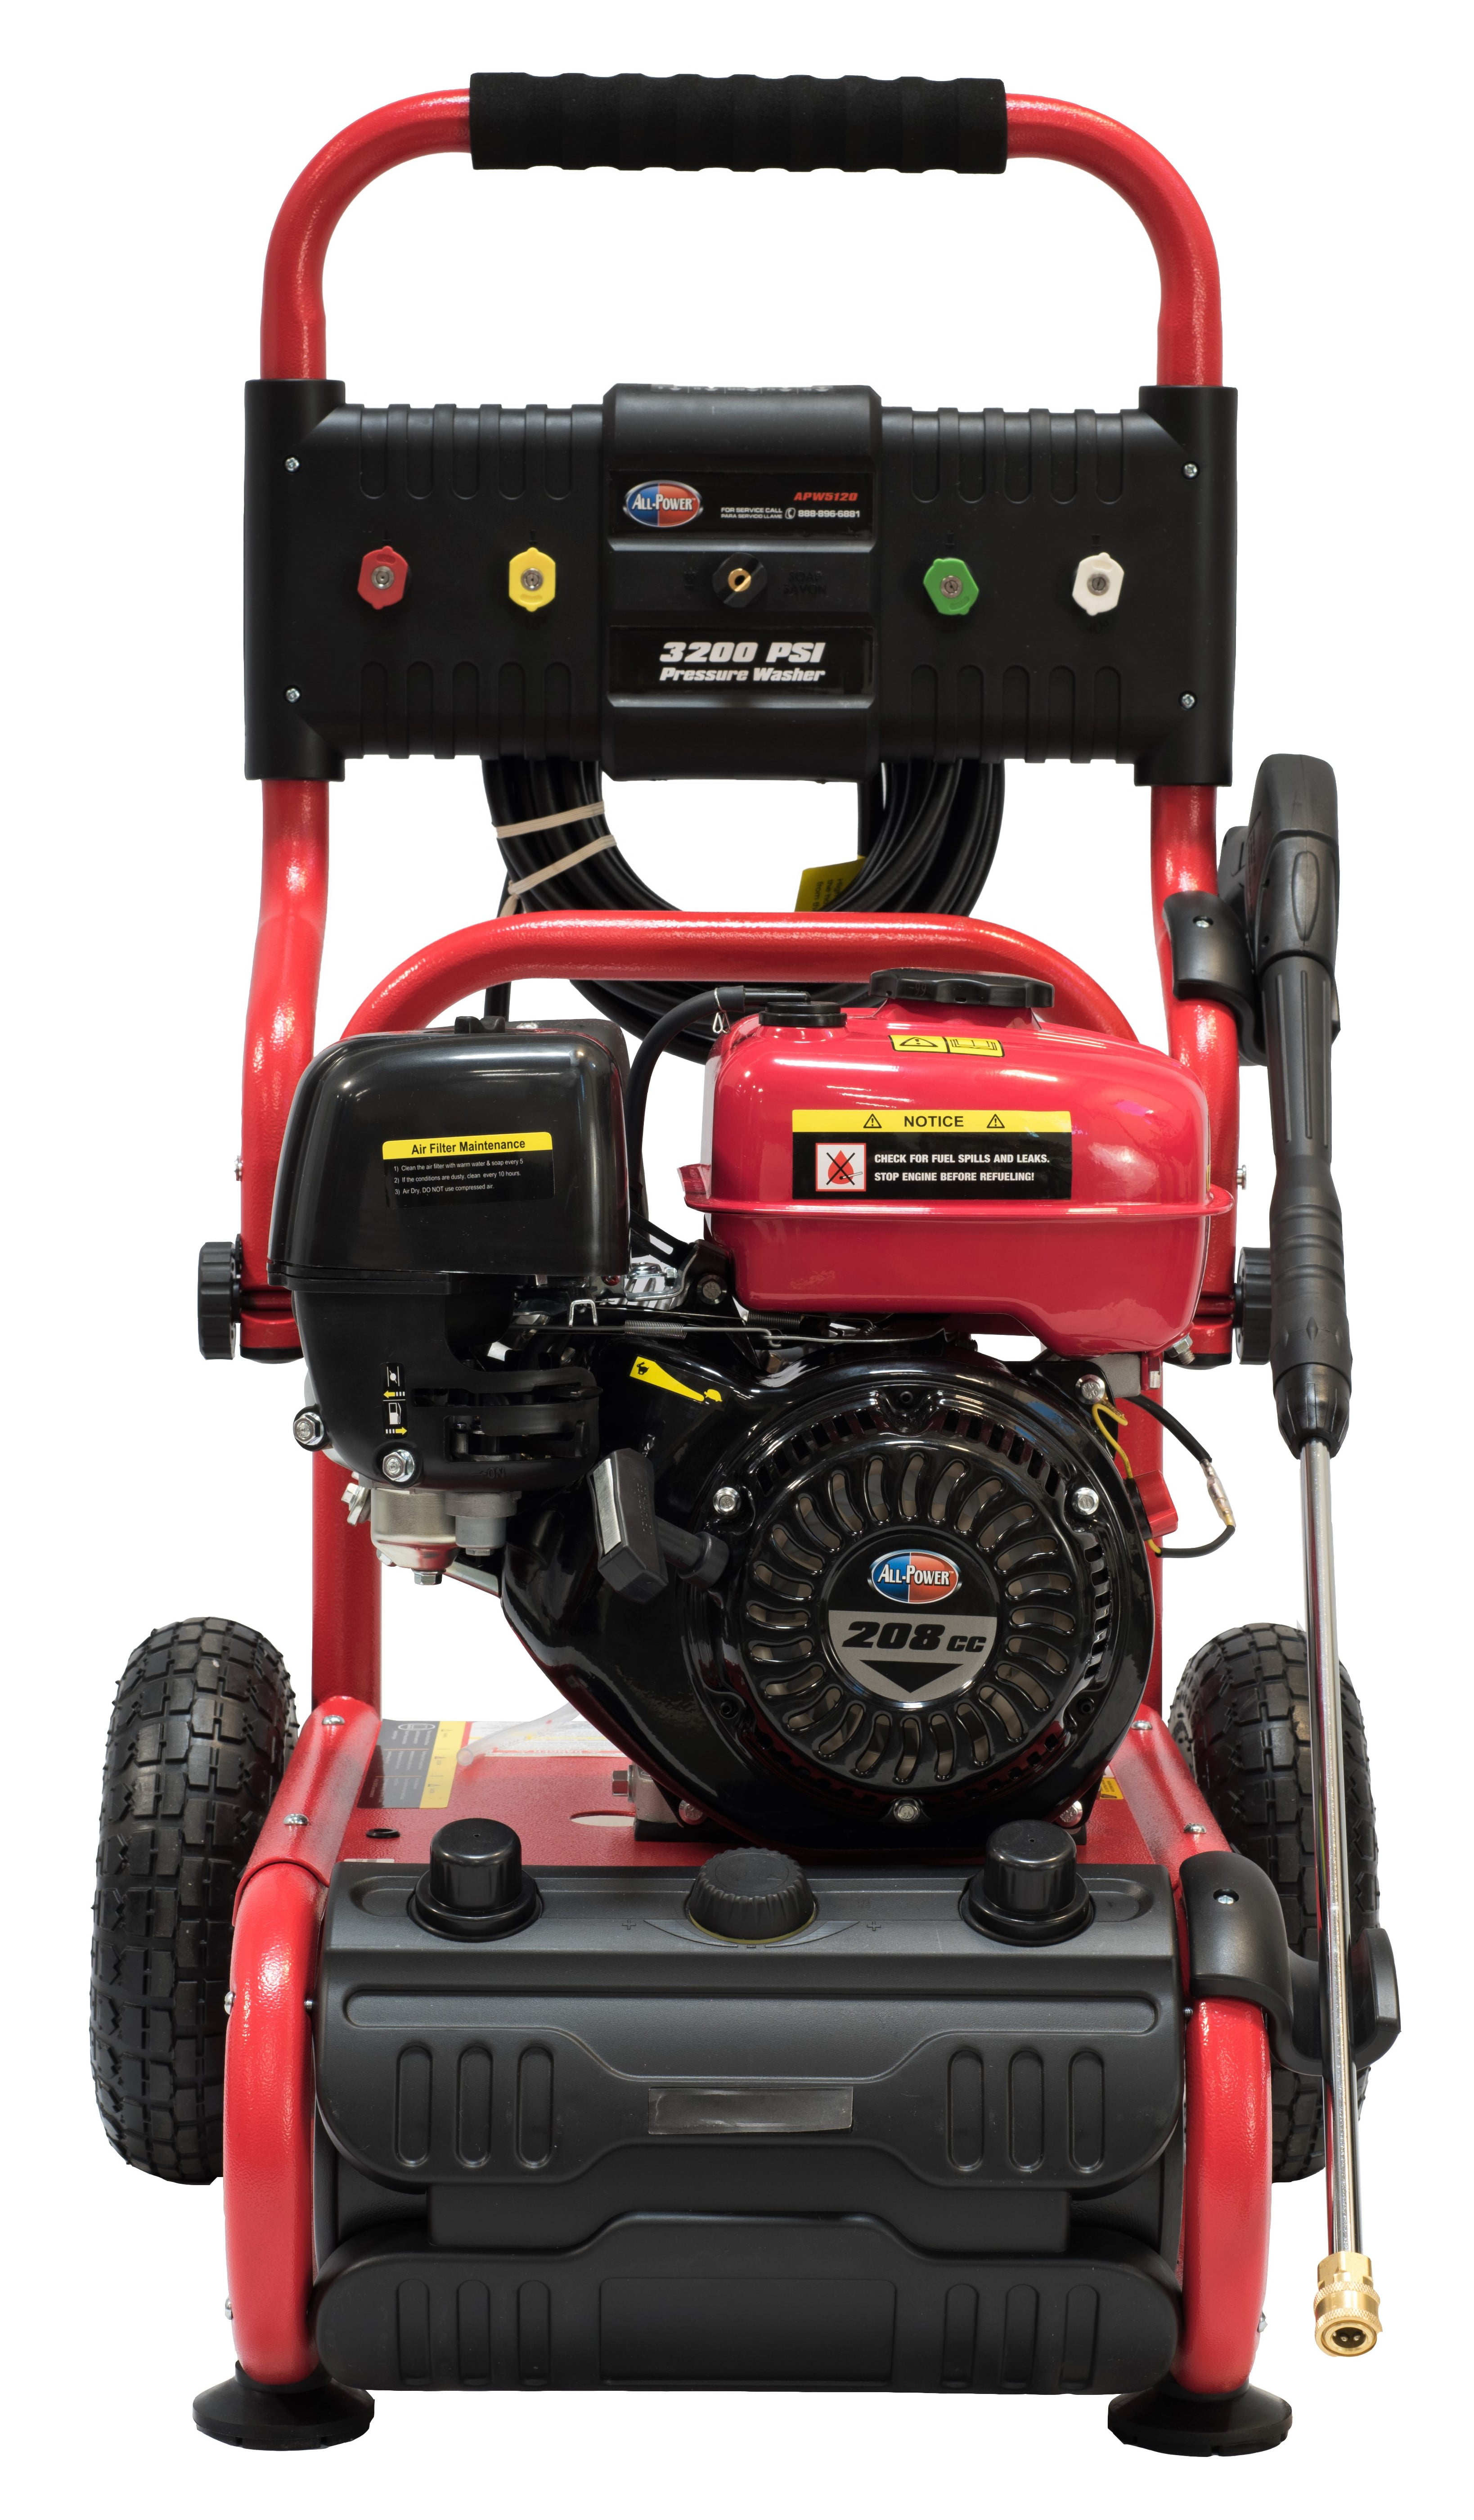 All Power Heavy Duty 3200 PSI, 2.6 GPM Gas Pressure Washer, Power Washer for Outdoor Cleaning, APW5120 - 1